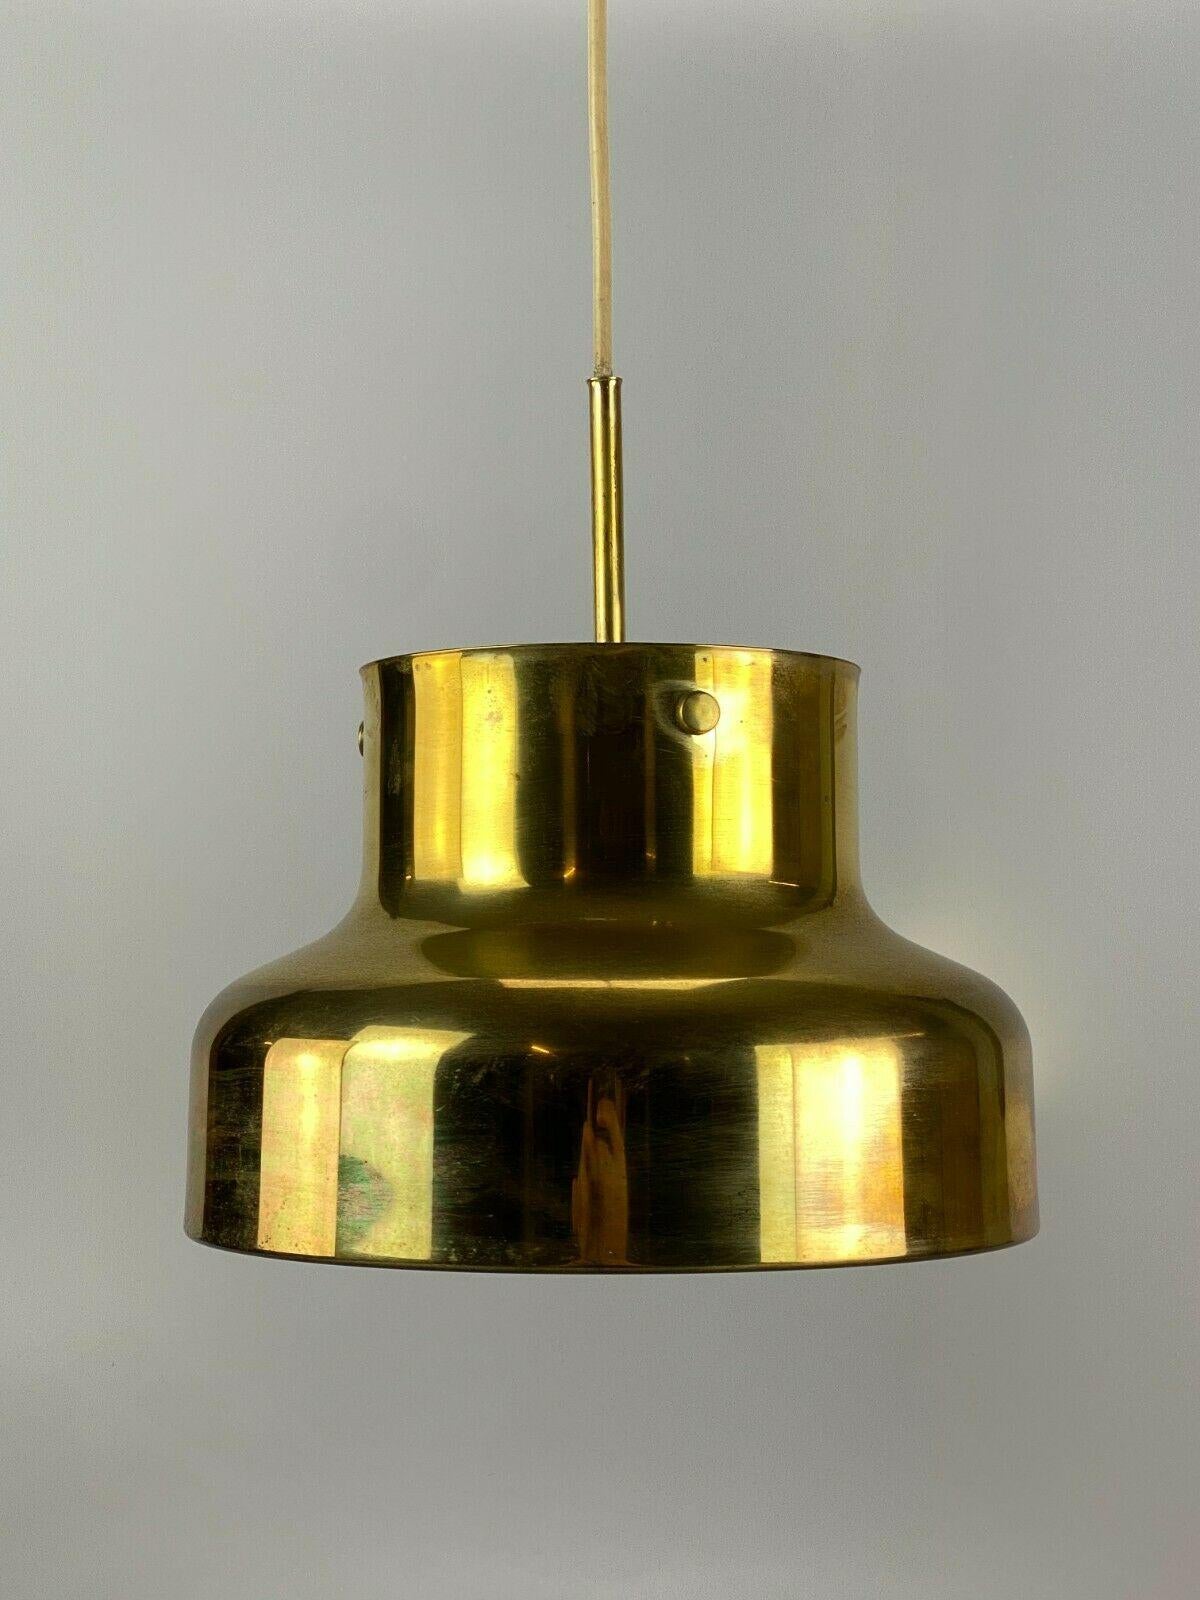 60s 70s lamp light ceiling lamp Atelje Lyktan Anders Pehrson Knubbling

Object: ceiling lamp

Manufacturer: Atelje Lyktan

Condition: good

Age: around 1960-1970

Dimensions:

Diameter = 25cm
Height = 17cm

Other notes:

The